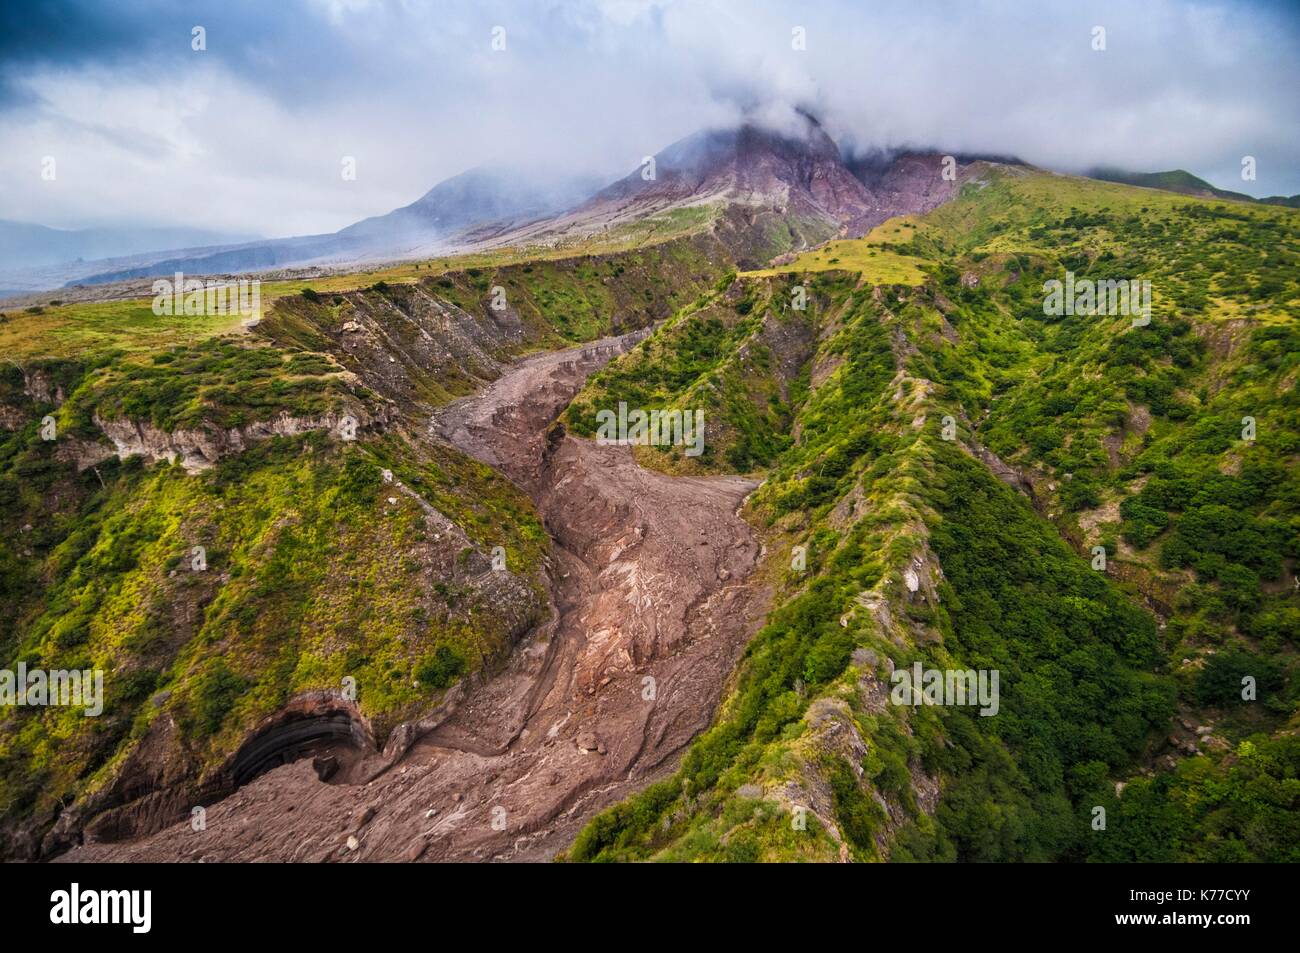 United Kingdom, Montserrat, English-speaking Caribbean, the flanks of the volcano bearing the stigmata of pyroclastic flows, the Soufriere Hills volcano (915 m) in the background (aerial view) Stock Photo